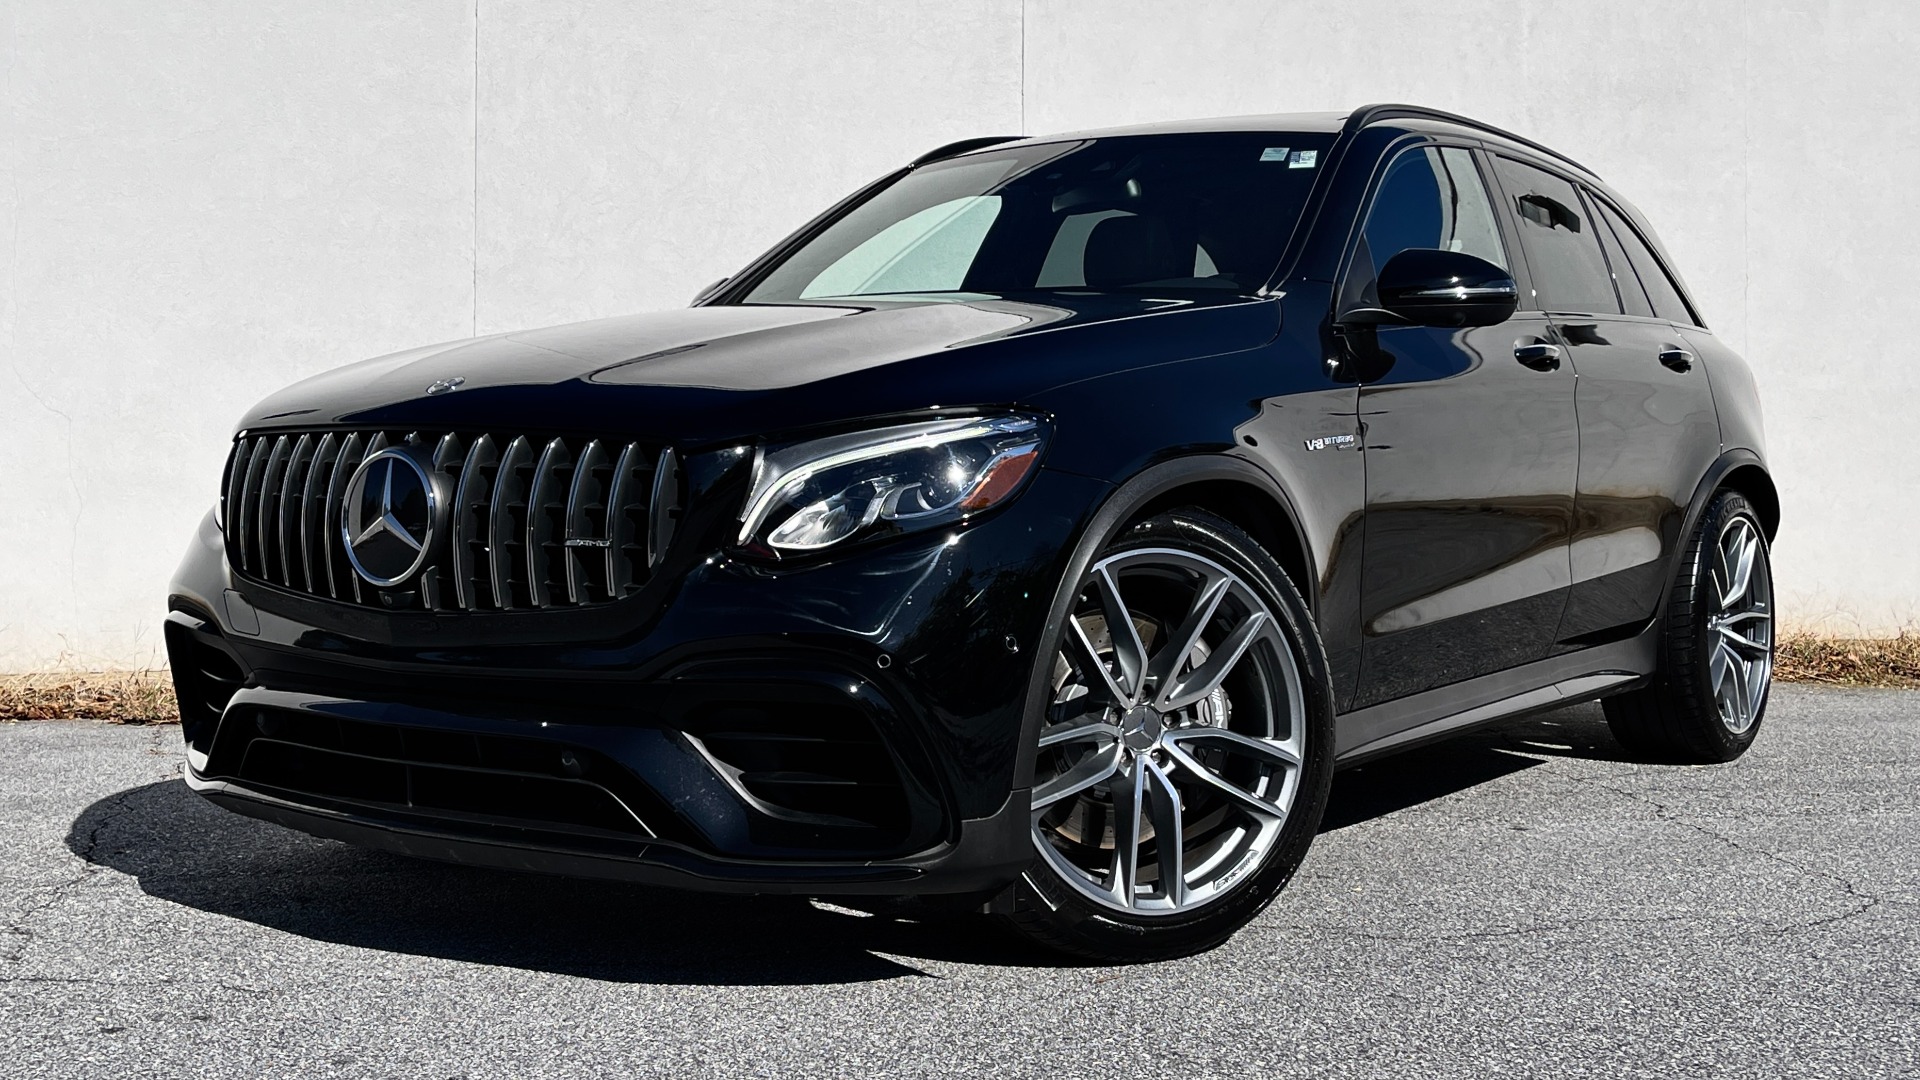 Used 2019 Mercedes-Benz GLC AMG GLC 63 / DRIVER ASSIST / AMG EXHAUST / CARBON FIBER / MULTIMEDIA for sale $61,995 at Formula Imports in Charlotte NC 28227 1